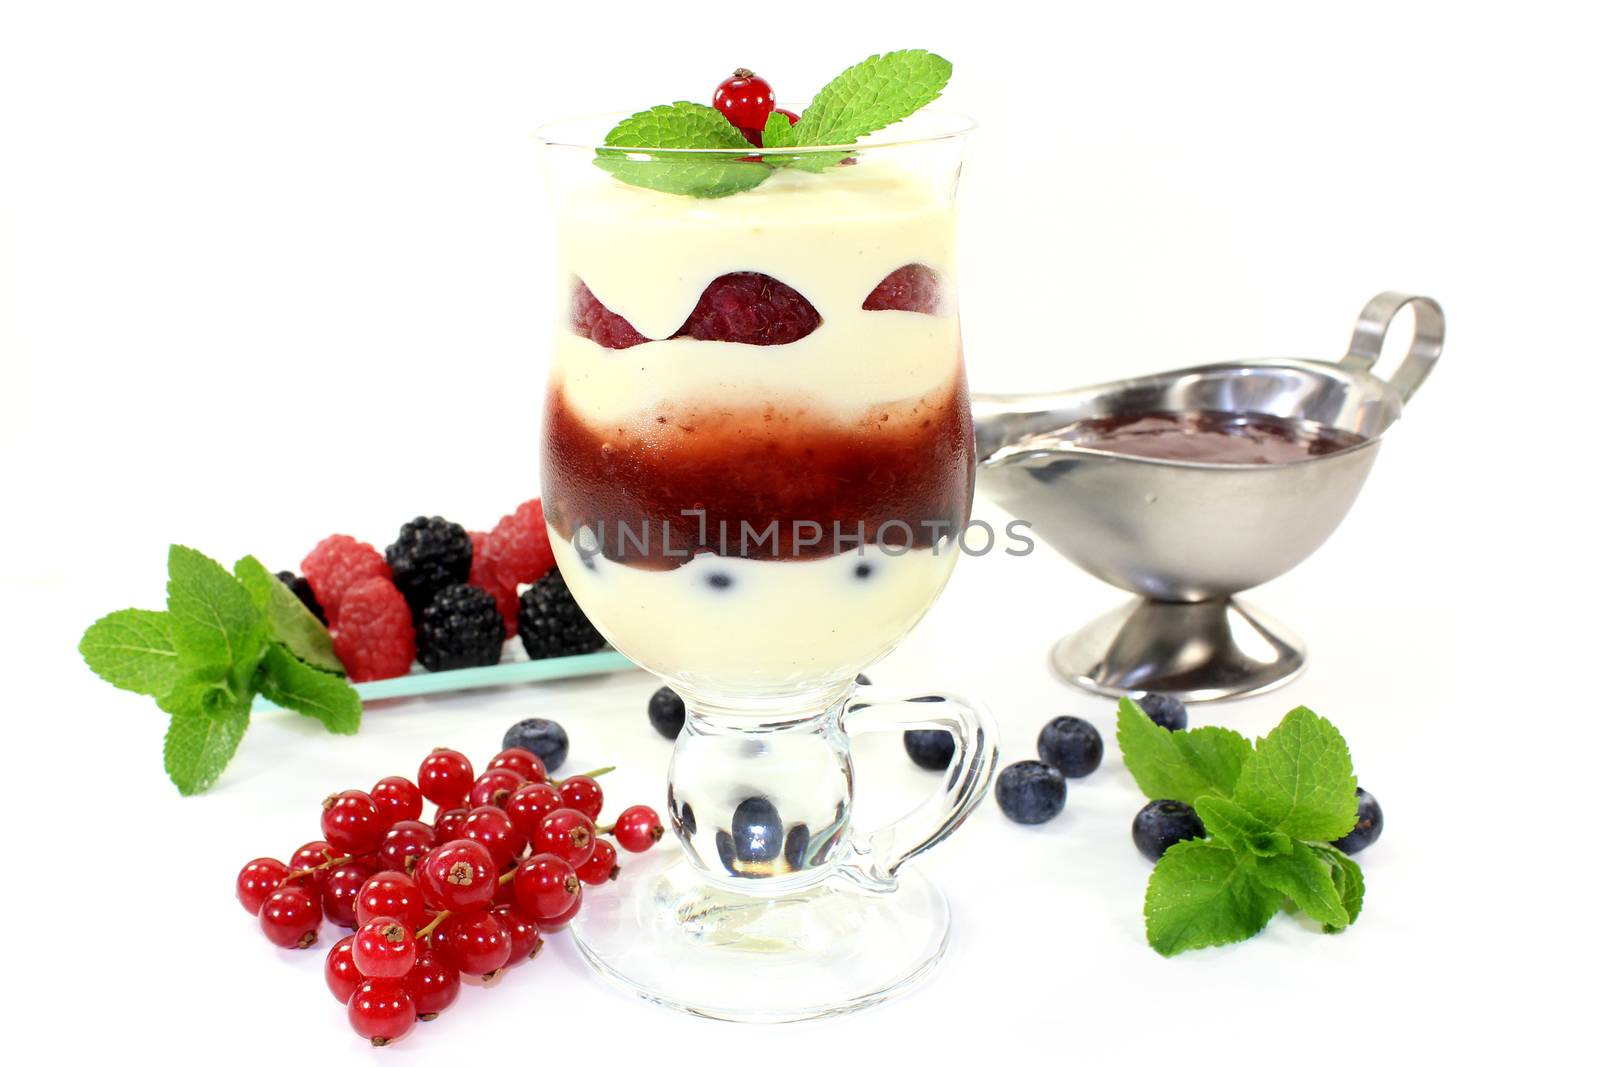 a dessert in a glass, layered with pudding, red stewed fruit and berries